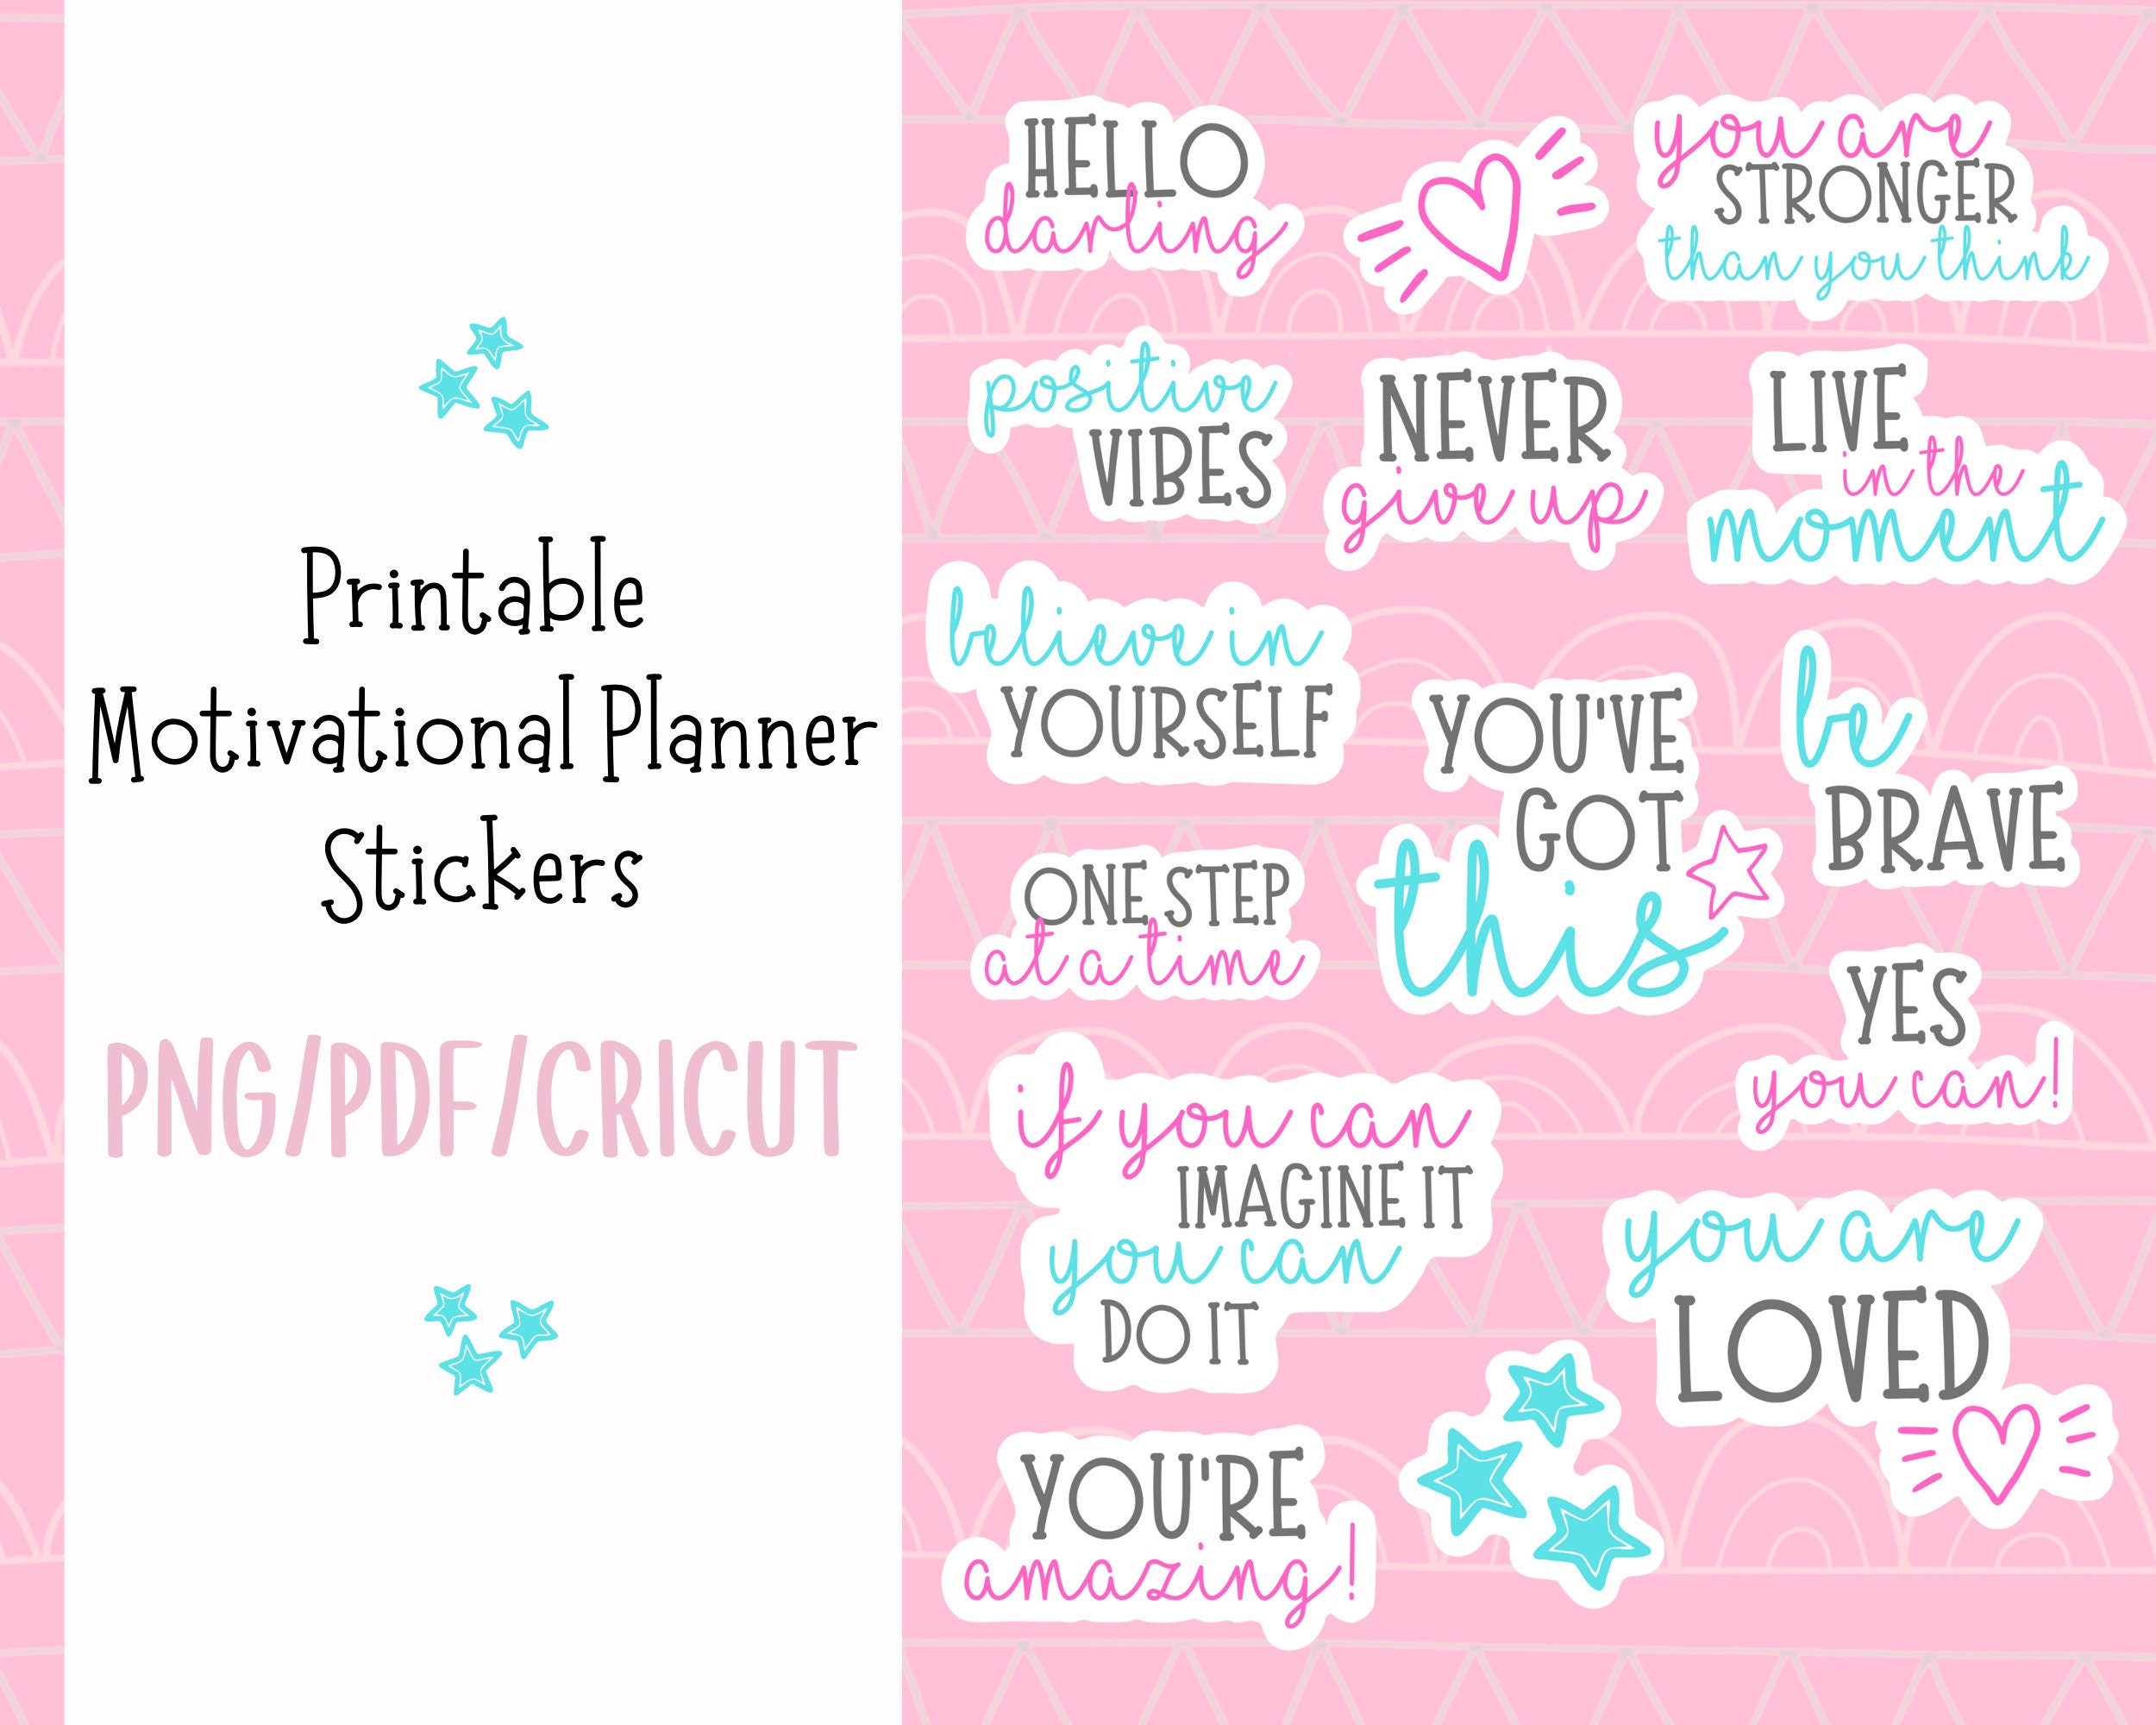 Inspirational-Motivational Stickers 2 Graphic by Happy Printables